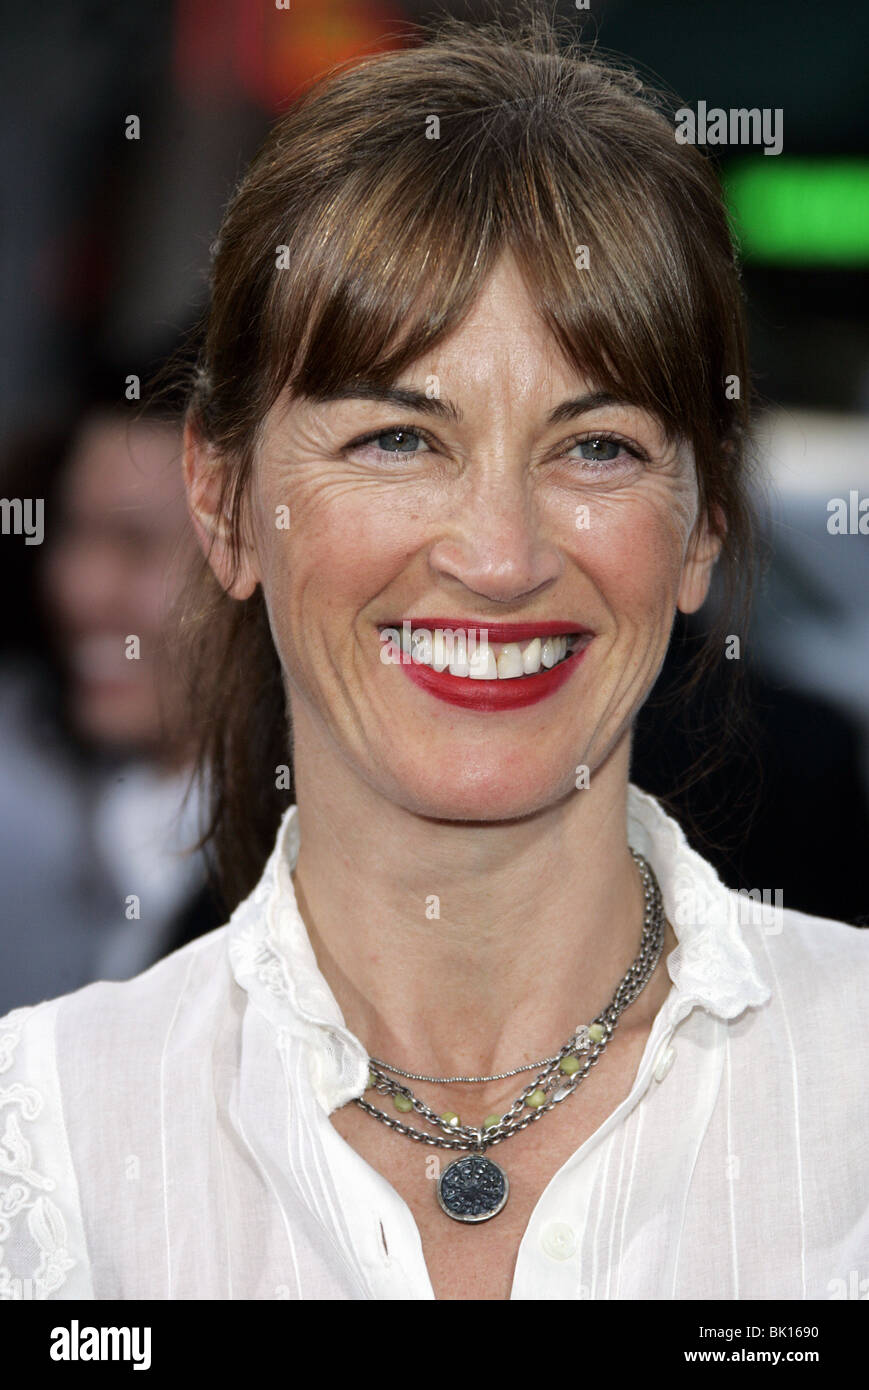 Amanda pays actress High Resolution Stock Photography and Images - Alamy